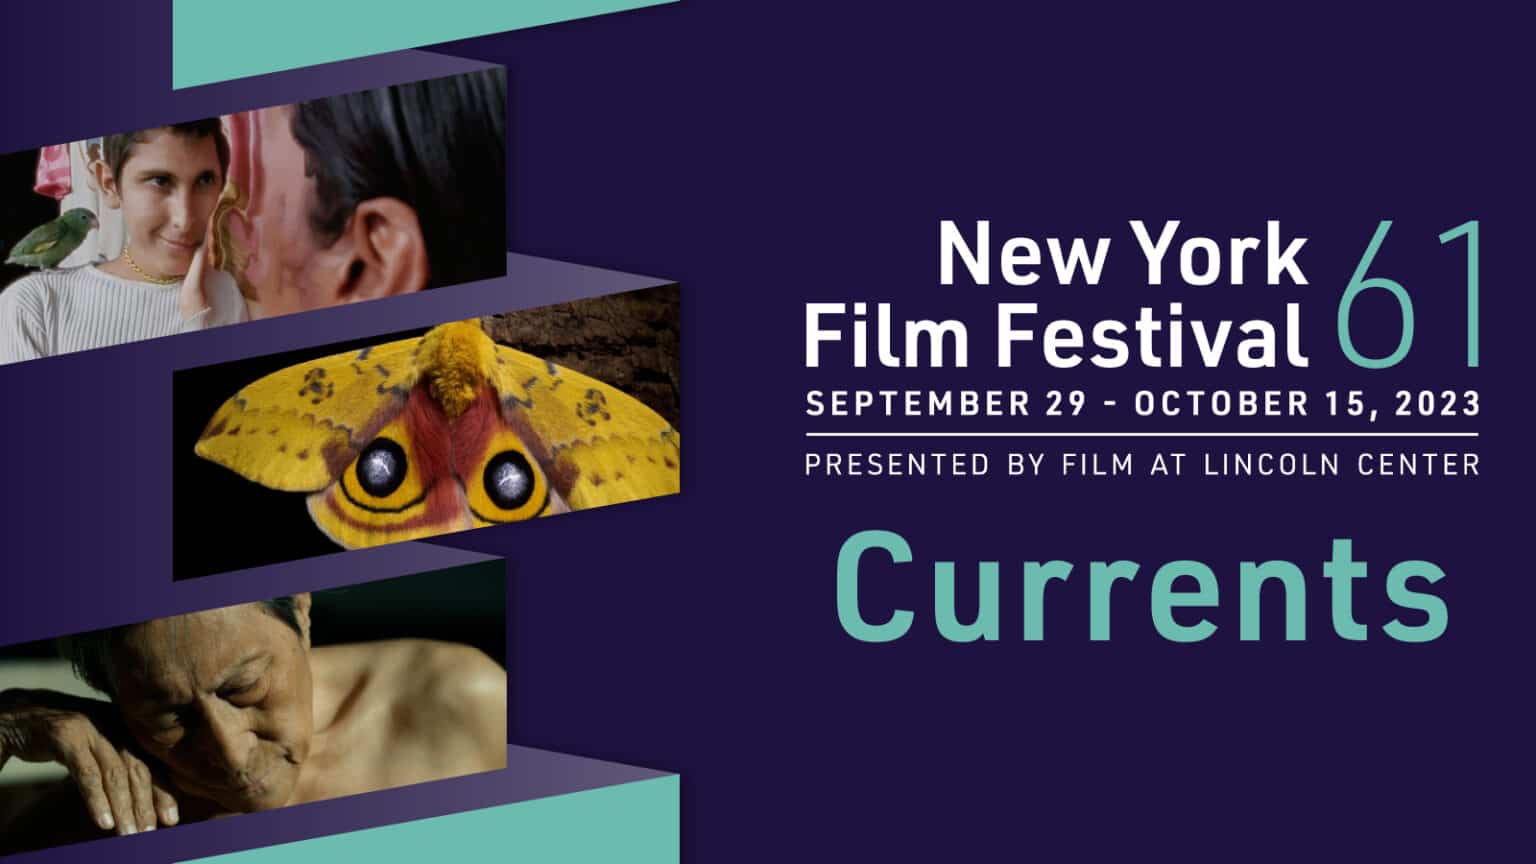 60th New York Film Festival Currents Announced